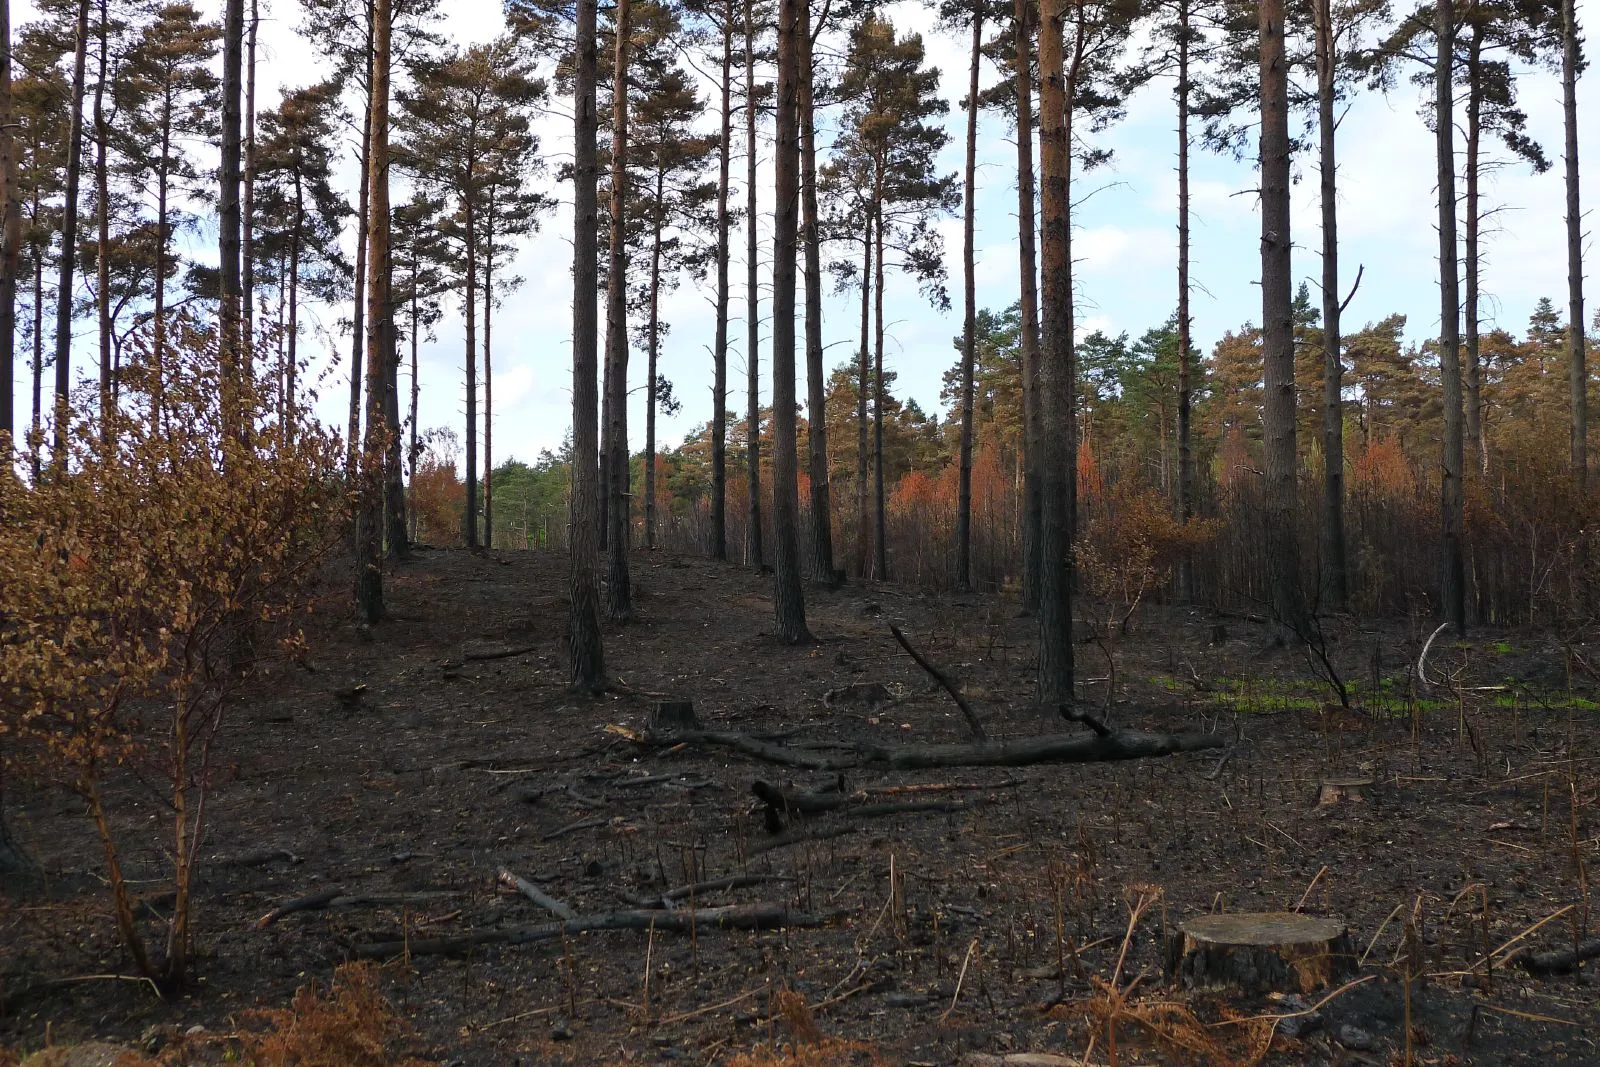 Photo showing: The result of a large forest fire a few weeks ago in Swinley Forest, near Crowthorne, Berks, UK